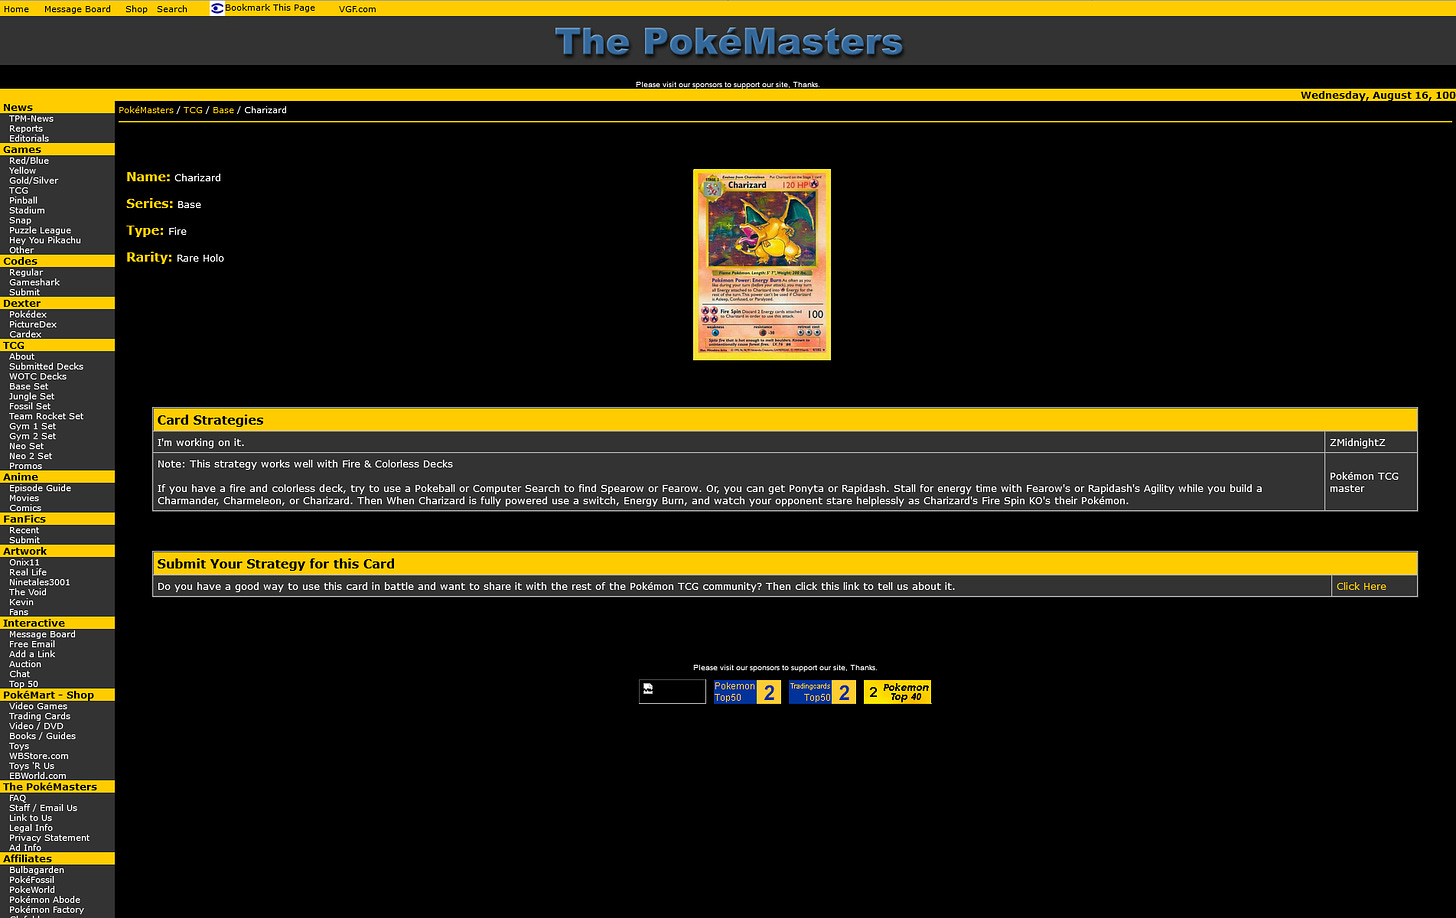 The Cardex was just one of several features that The PokéMasters included on its website (from August 2000)